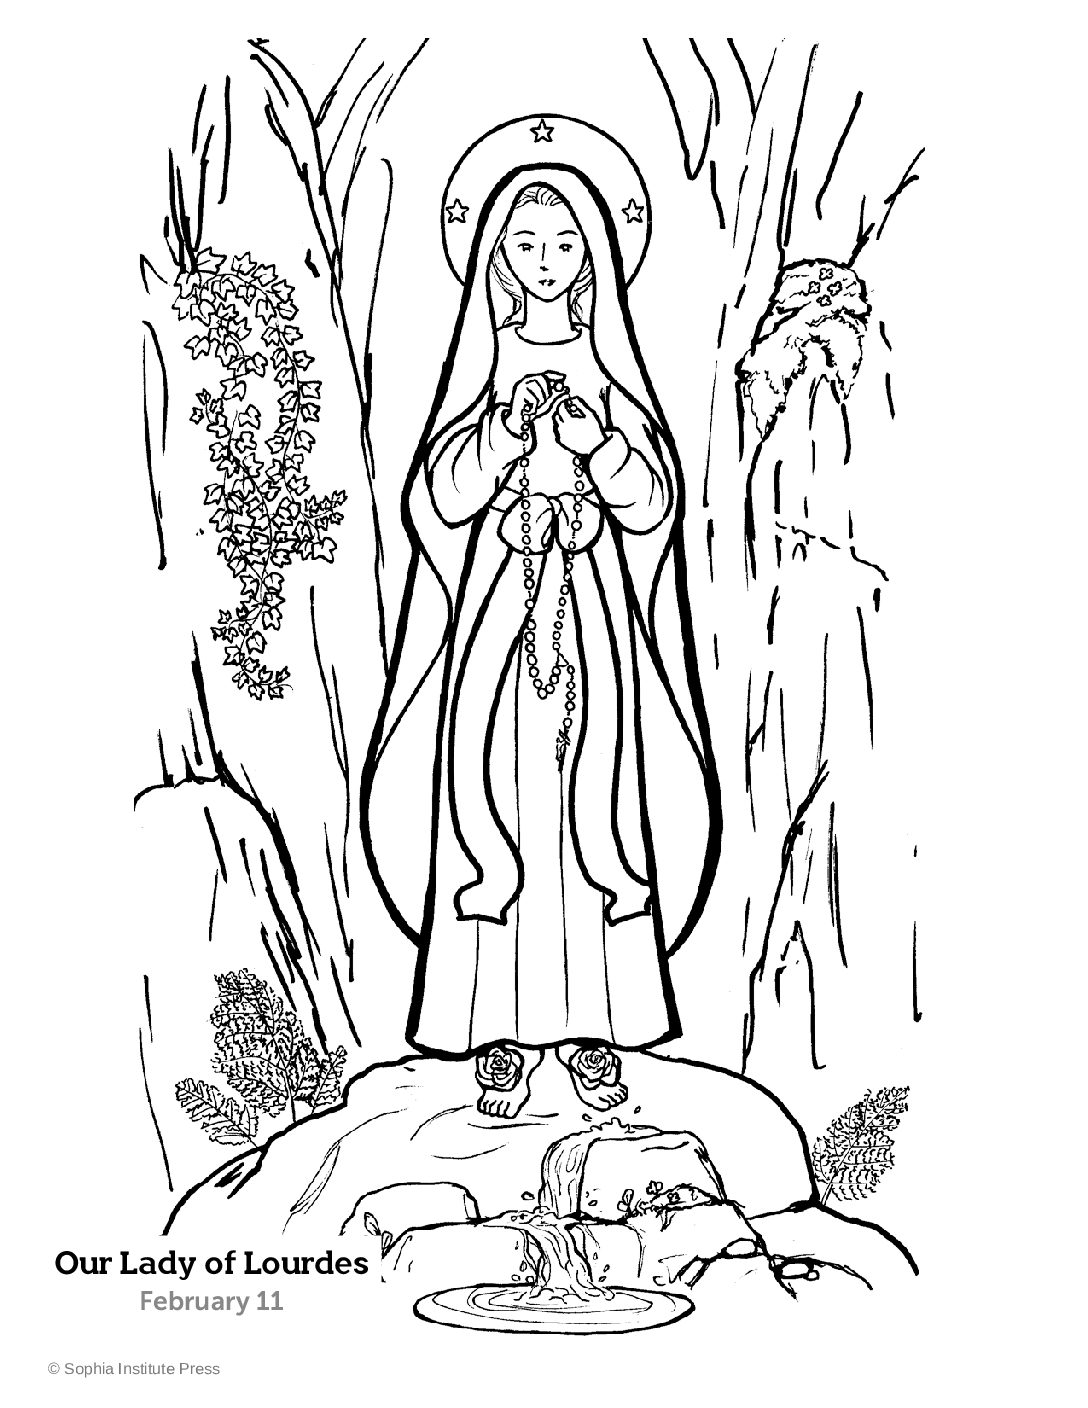 Our Lady of Lourdes Story and Coloring Page - Sophia Teachers